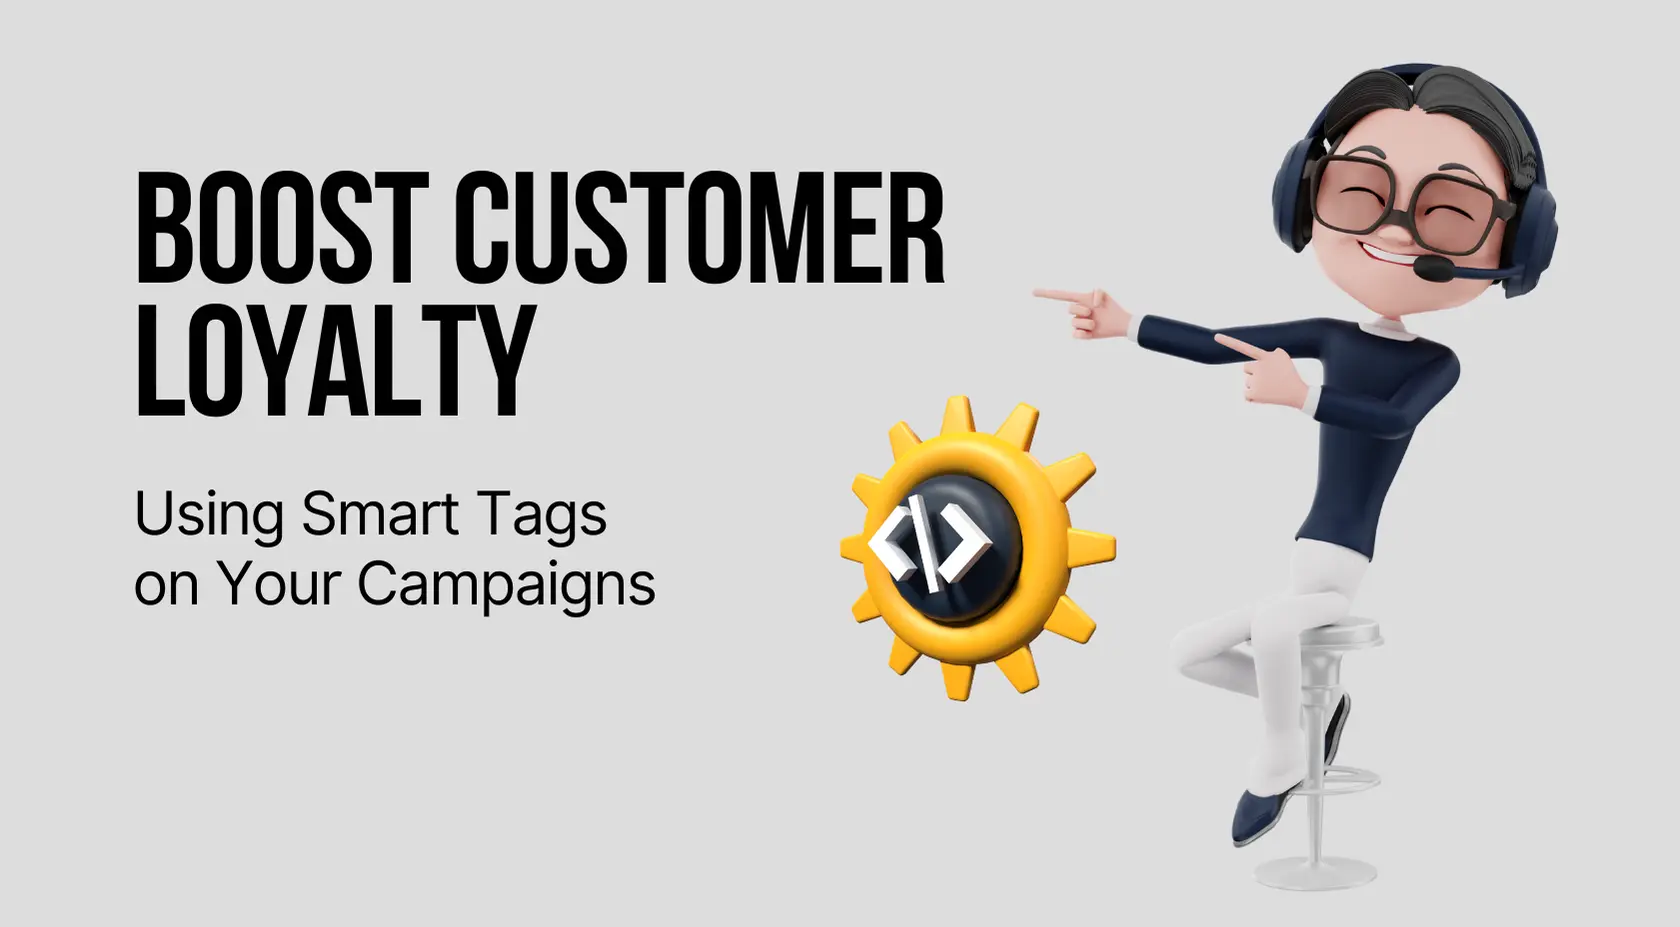 Boost Customer Loyalty Using Smart Tags on Your Campaigns